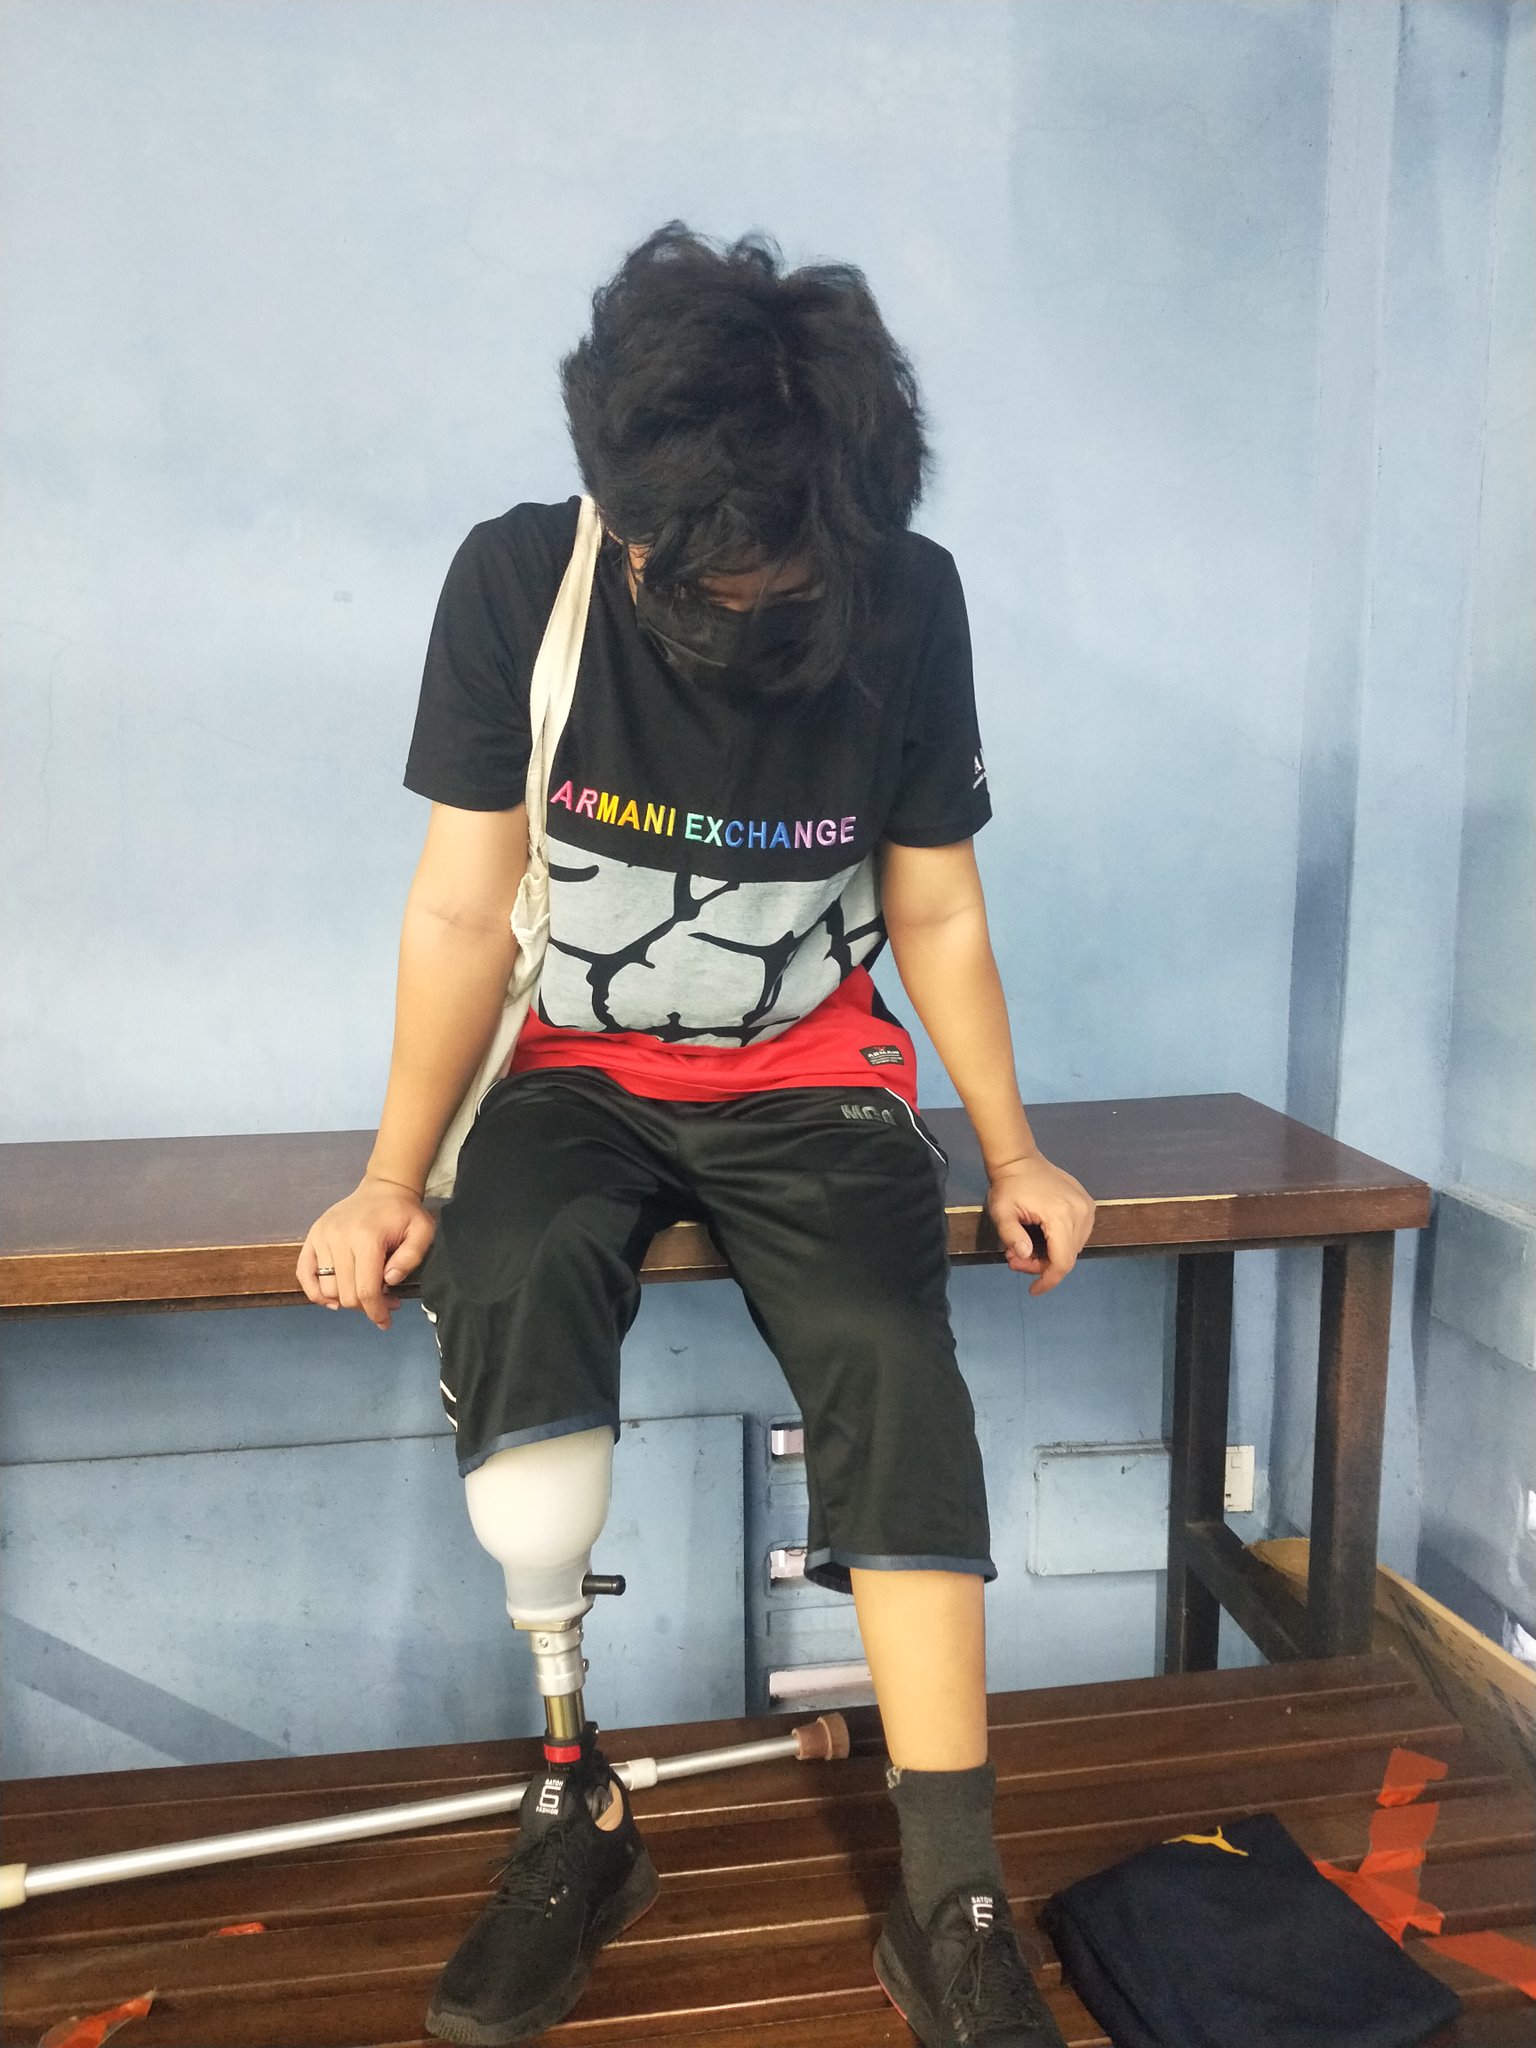 Sofwan has had his right leg amputated below the knee in 2019. Source: @sofw4n_